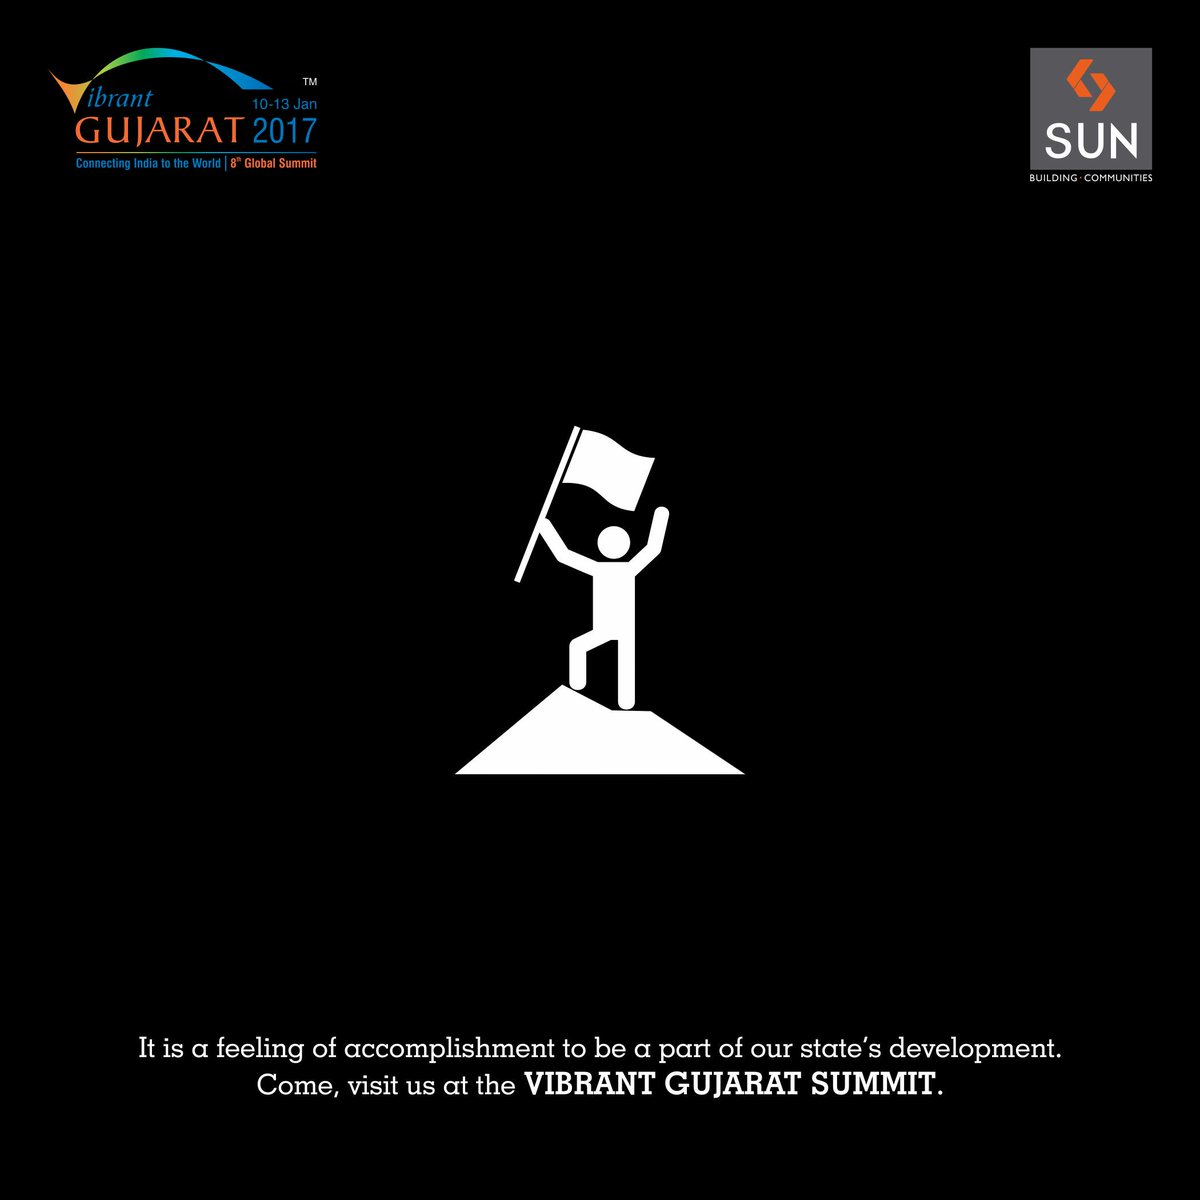 Feel accomplished by participating in the success and development of Gujarat. Visit #VibrantGujaratSummit https://t.co/hymaKmCAth